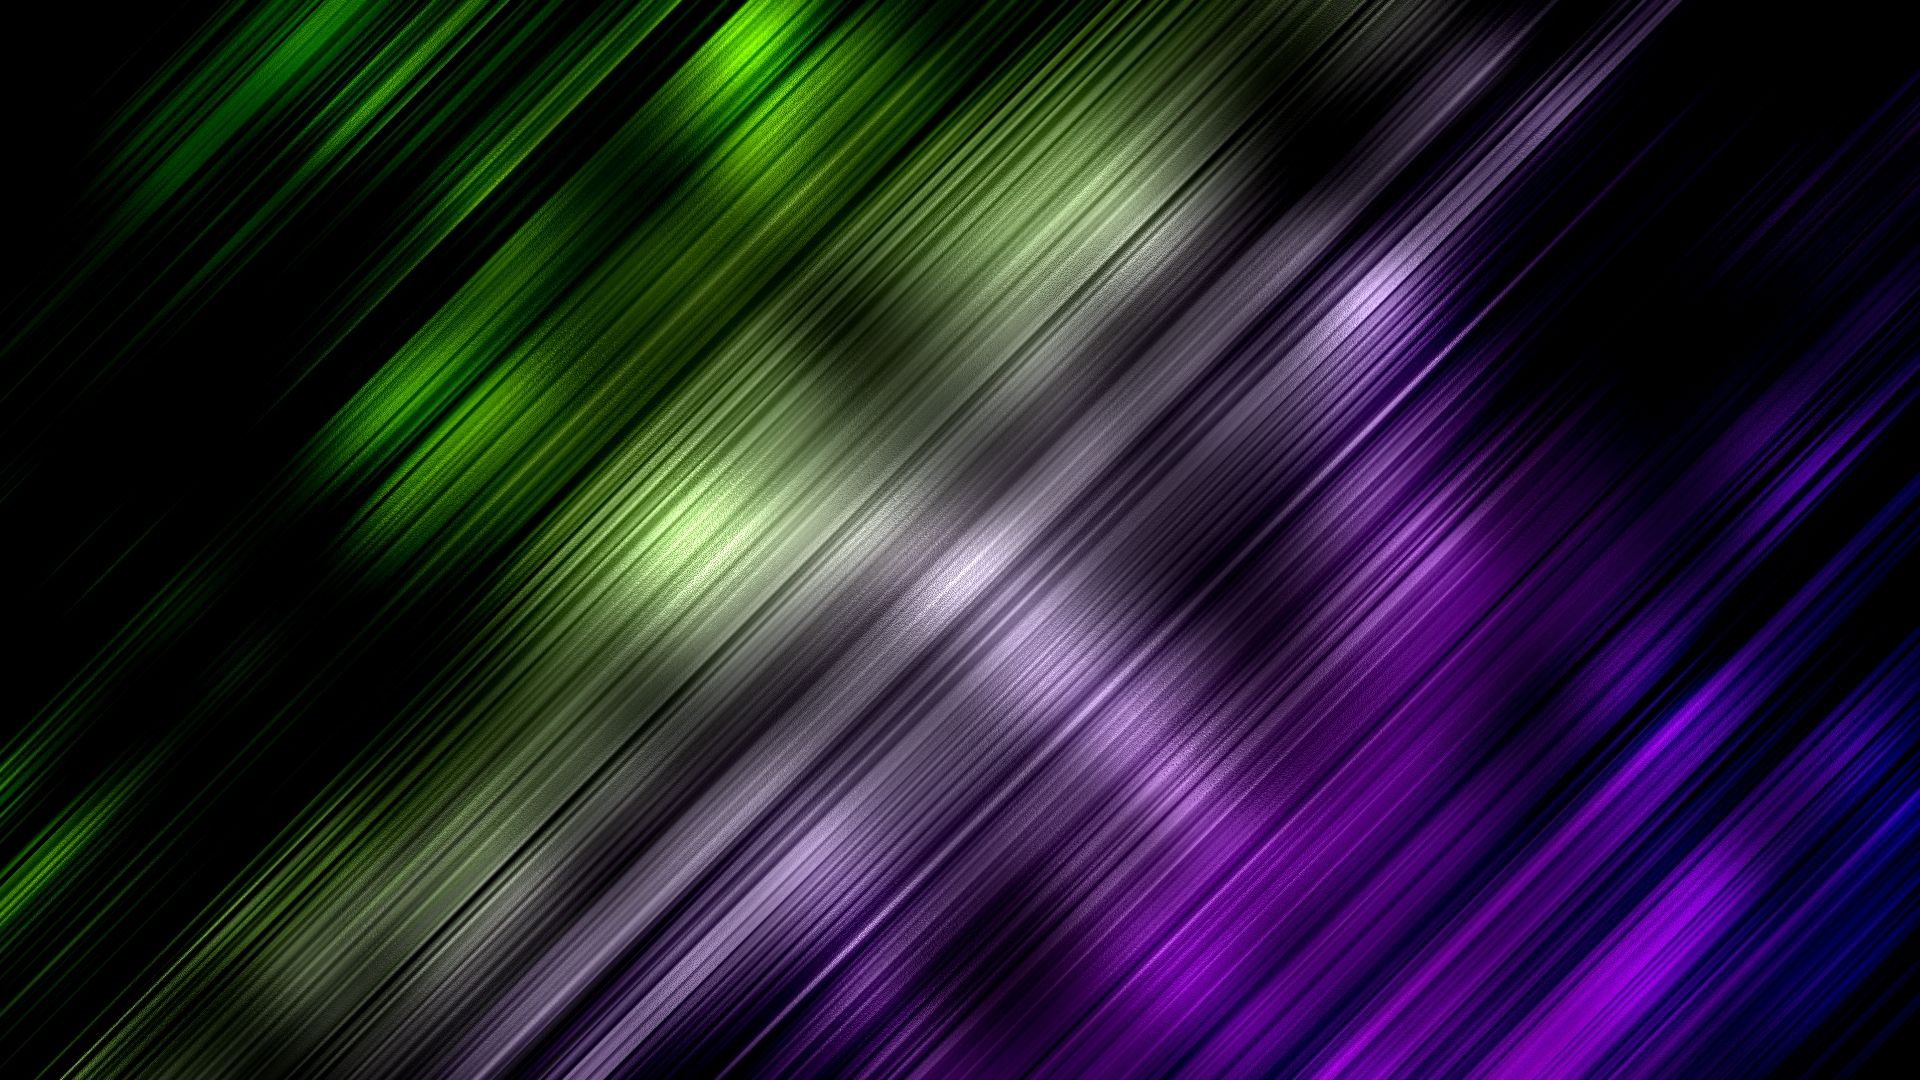 Free download Full HD Wallpaper Backgrounds Lines Green Purple